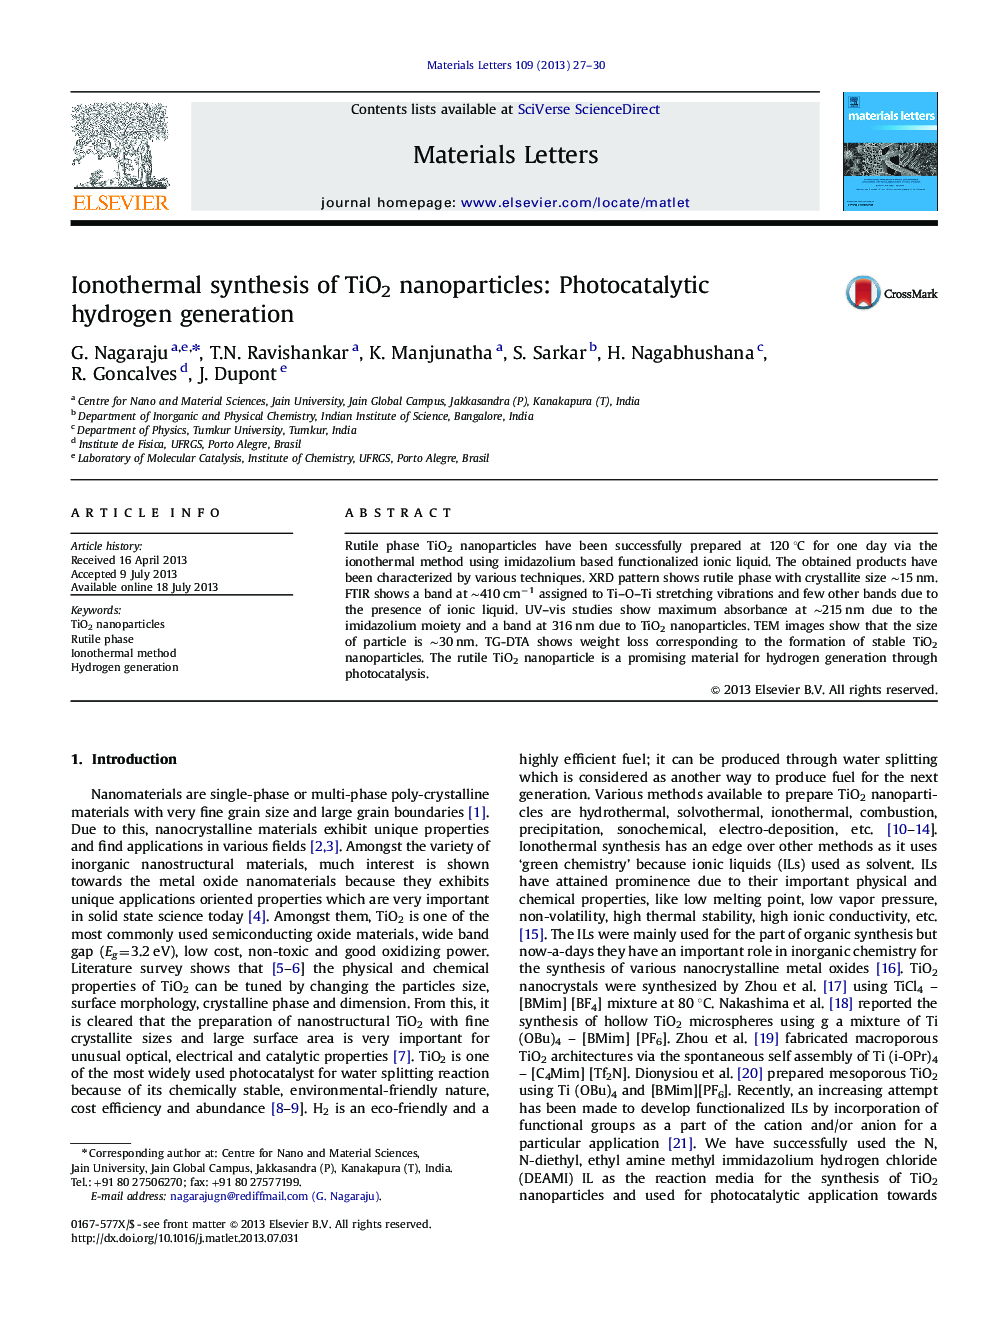 Ionothermal synthesis of TiO2 nanoparticles: Photocatalytic hydrogen generation